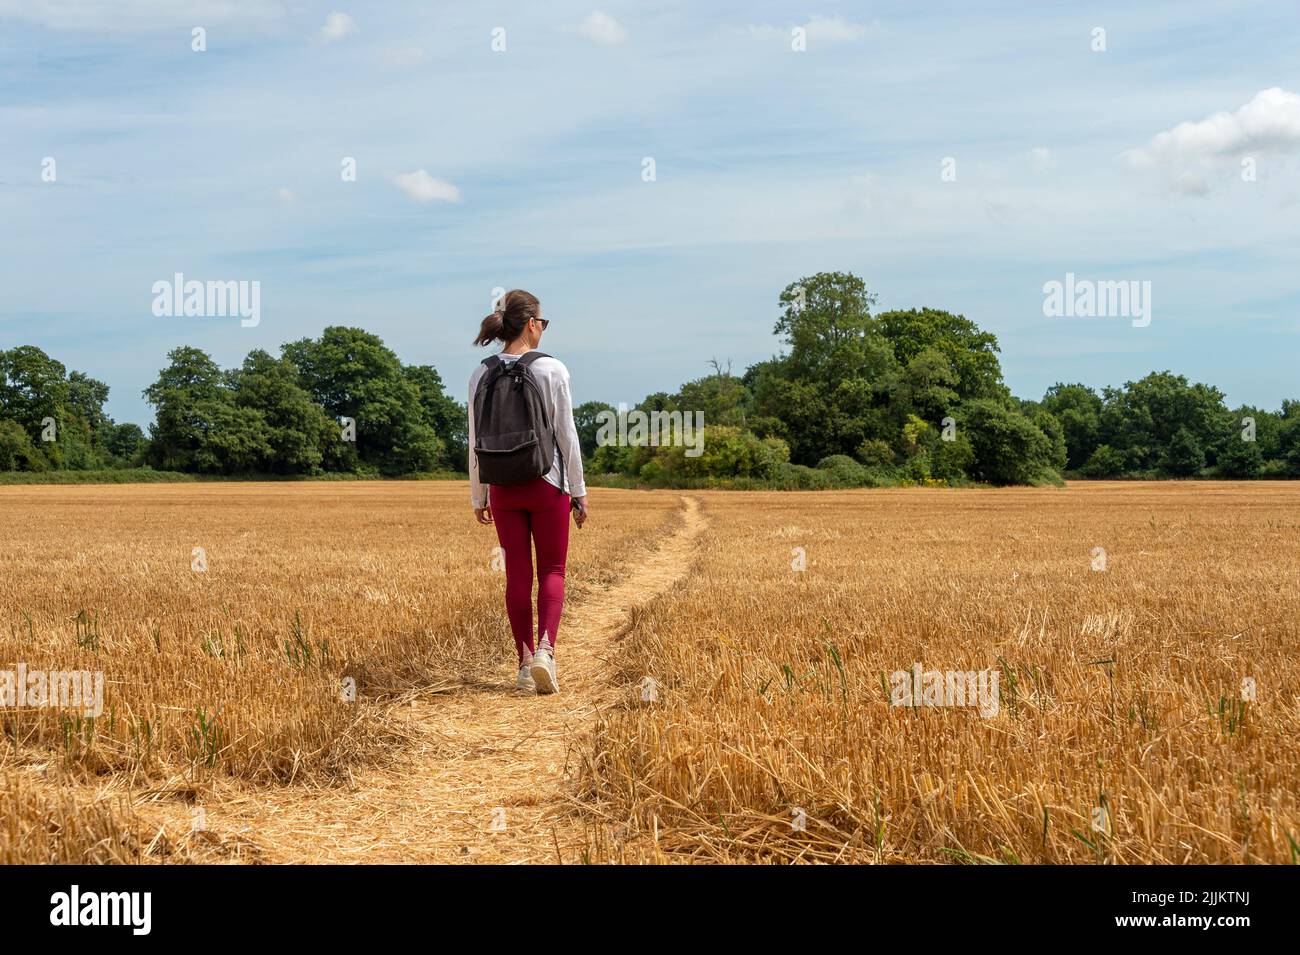 Woman walking through the countryside, harvested field. Stock Photo